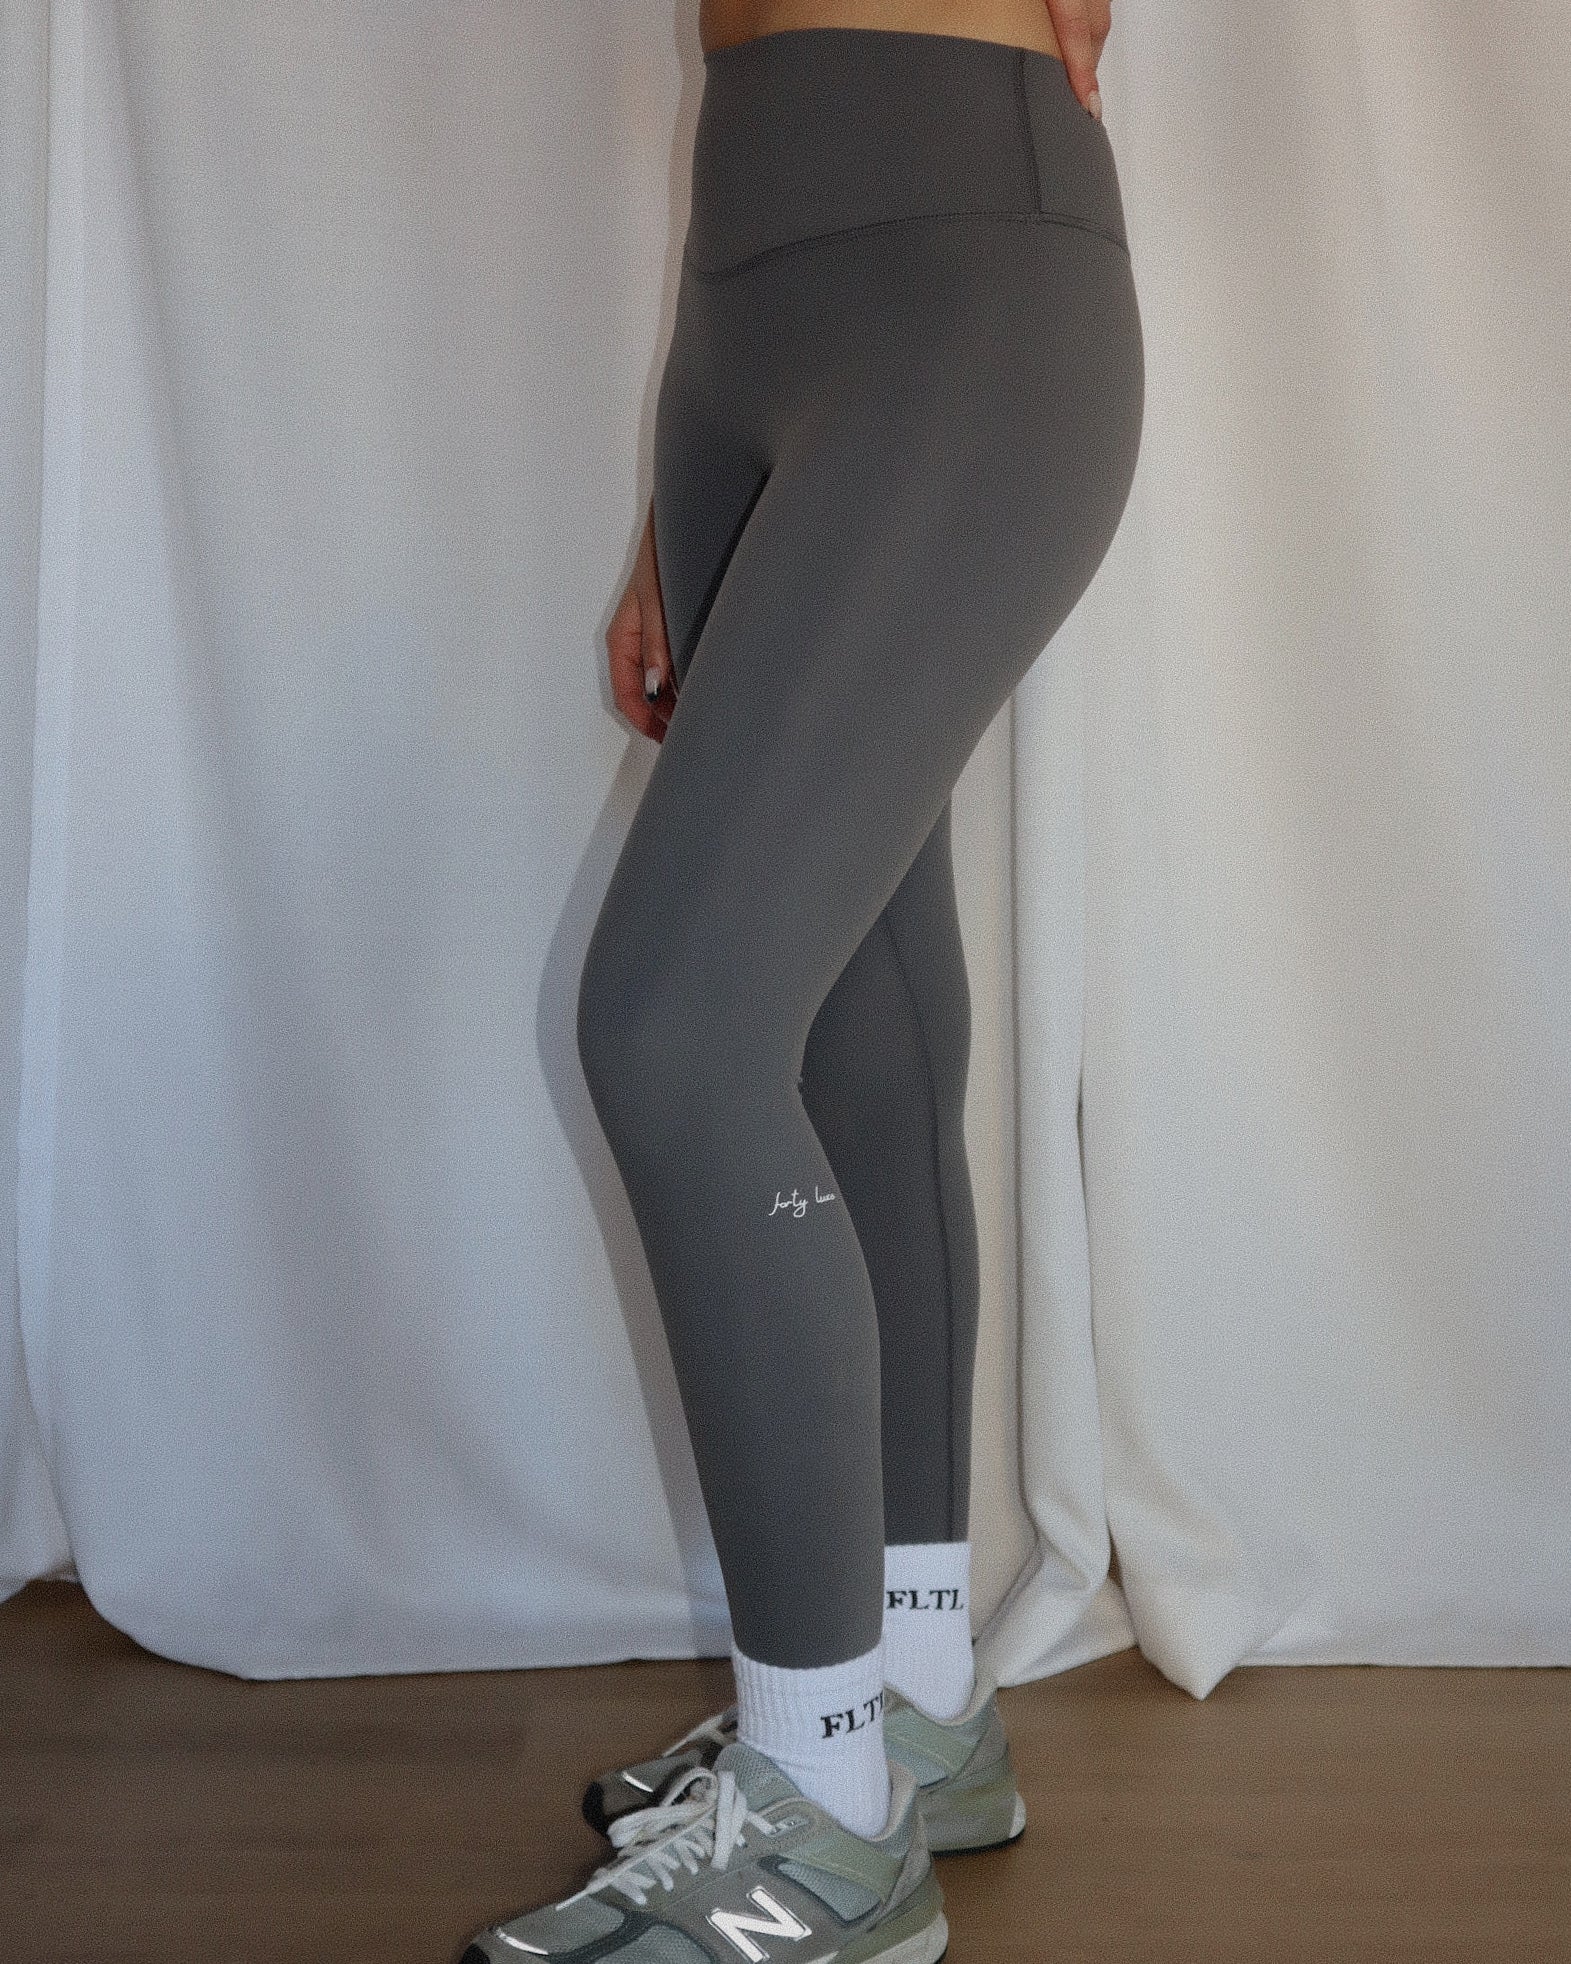 A Better Life Exists Active compression leggings in gray